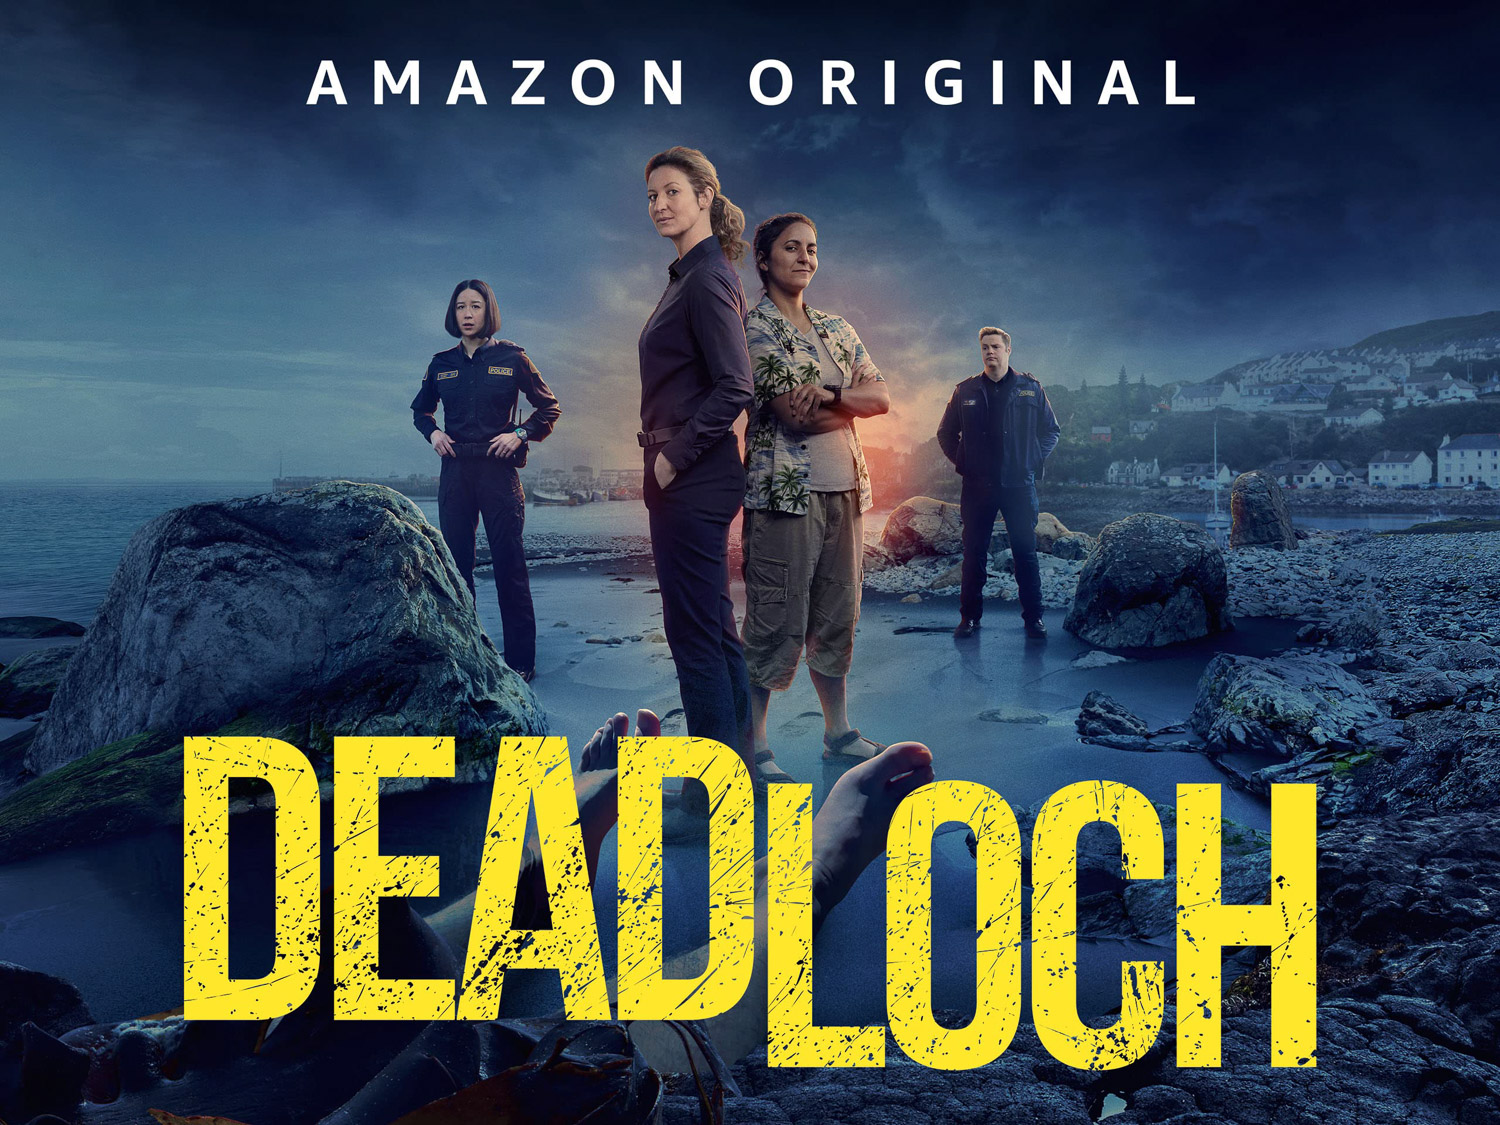 Four people standing on a darkened beach with the word Deadloch in large yellow letters